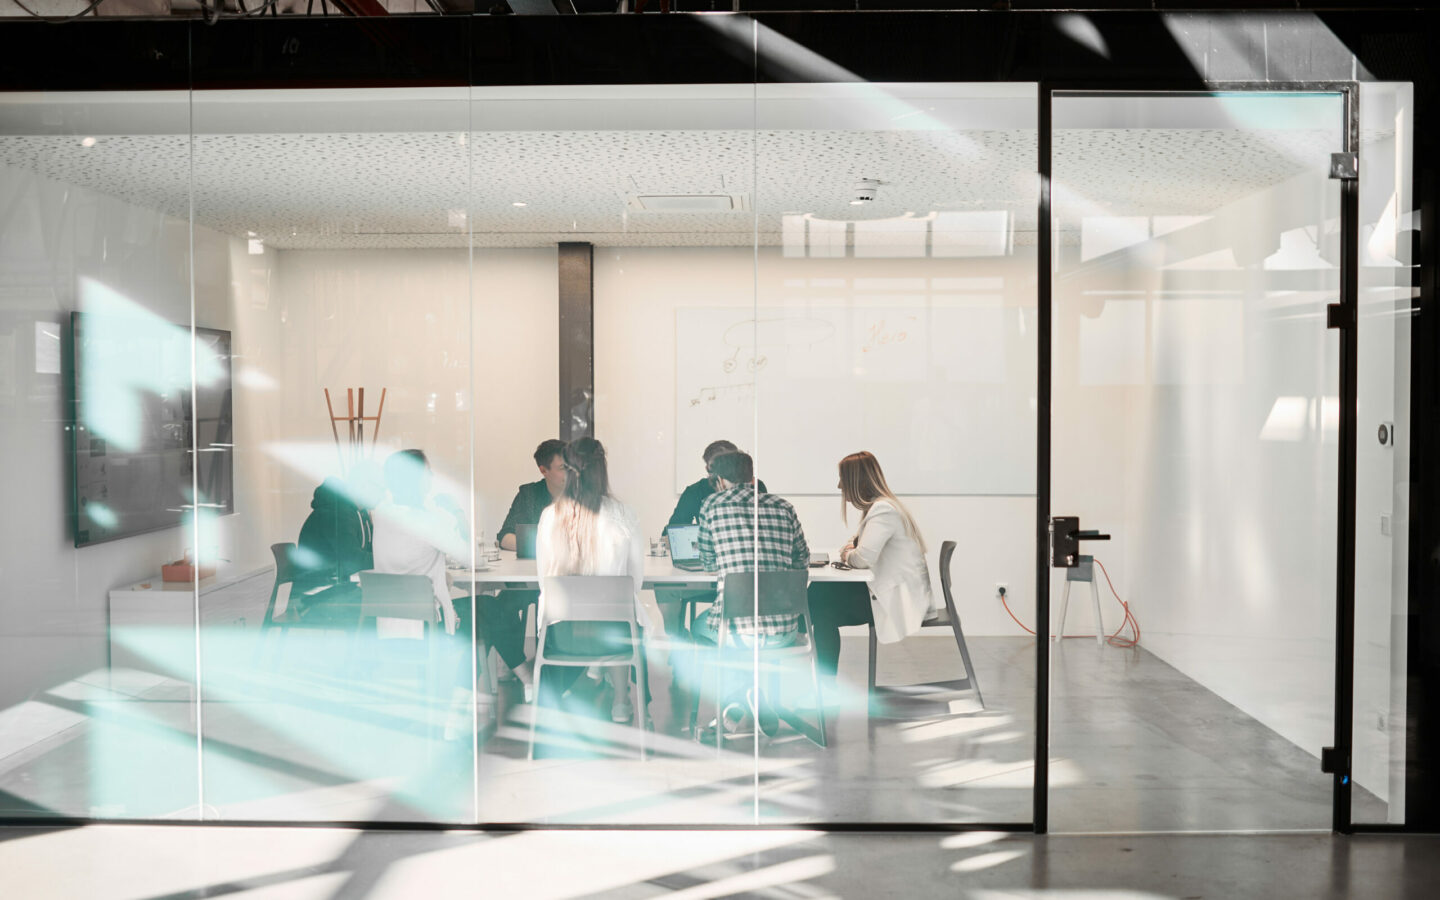 Photo of a group holding a meeting in a room with glass walls.